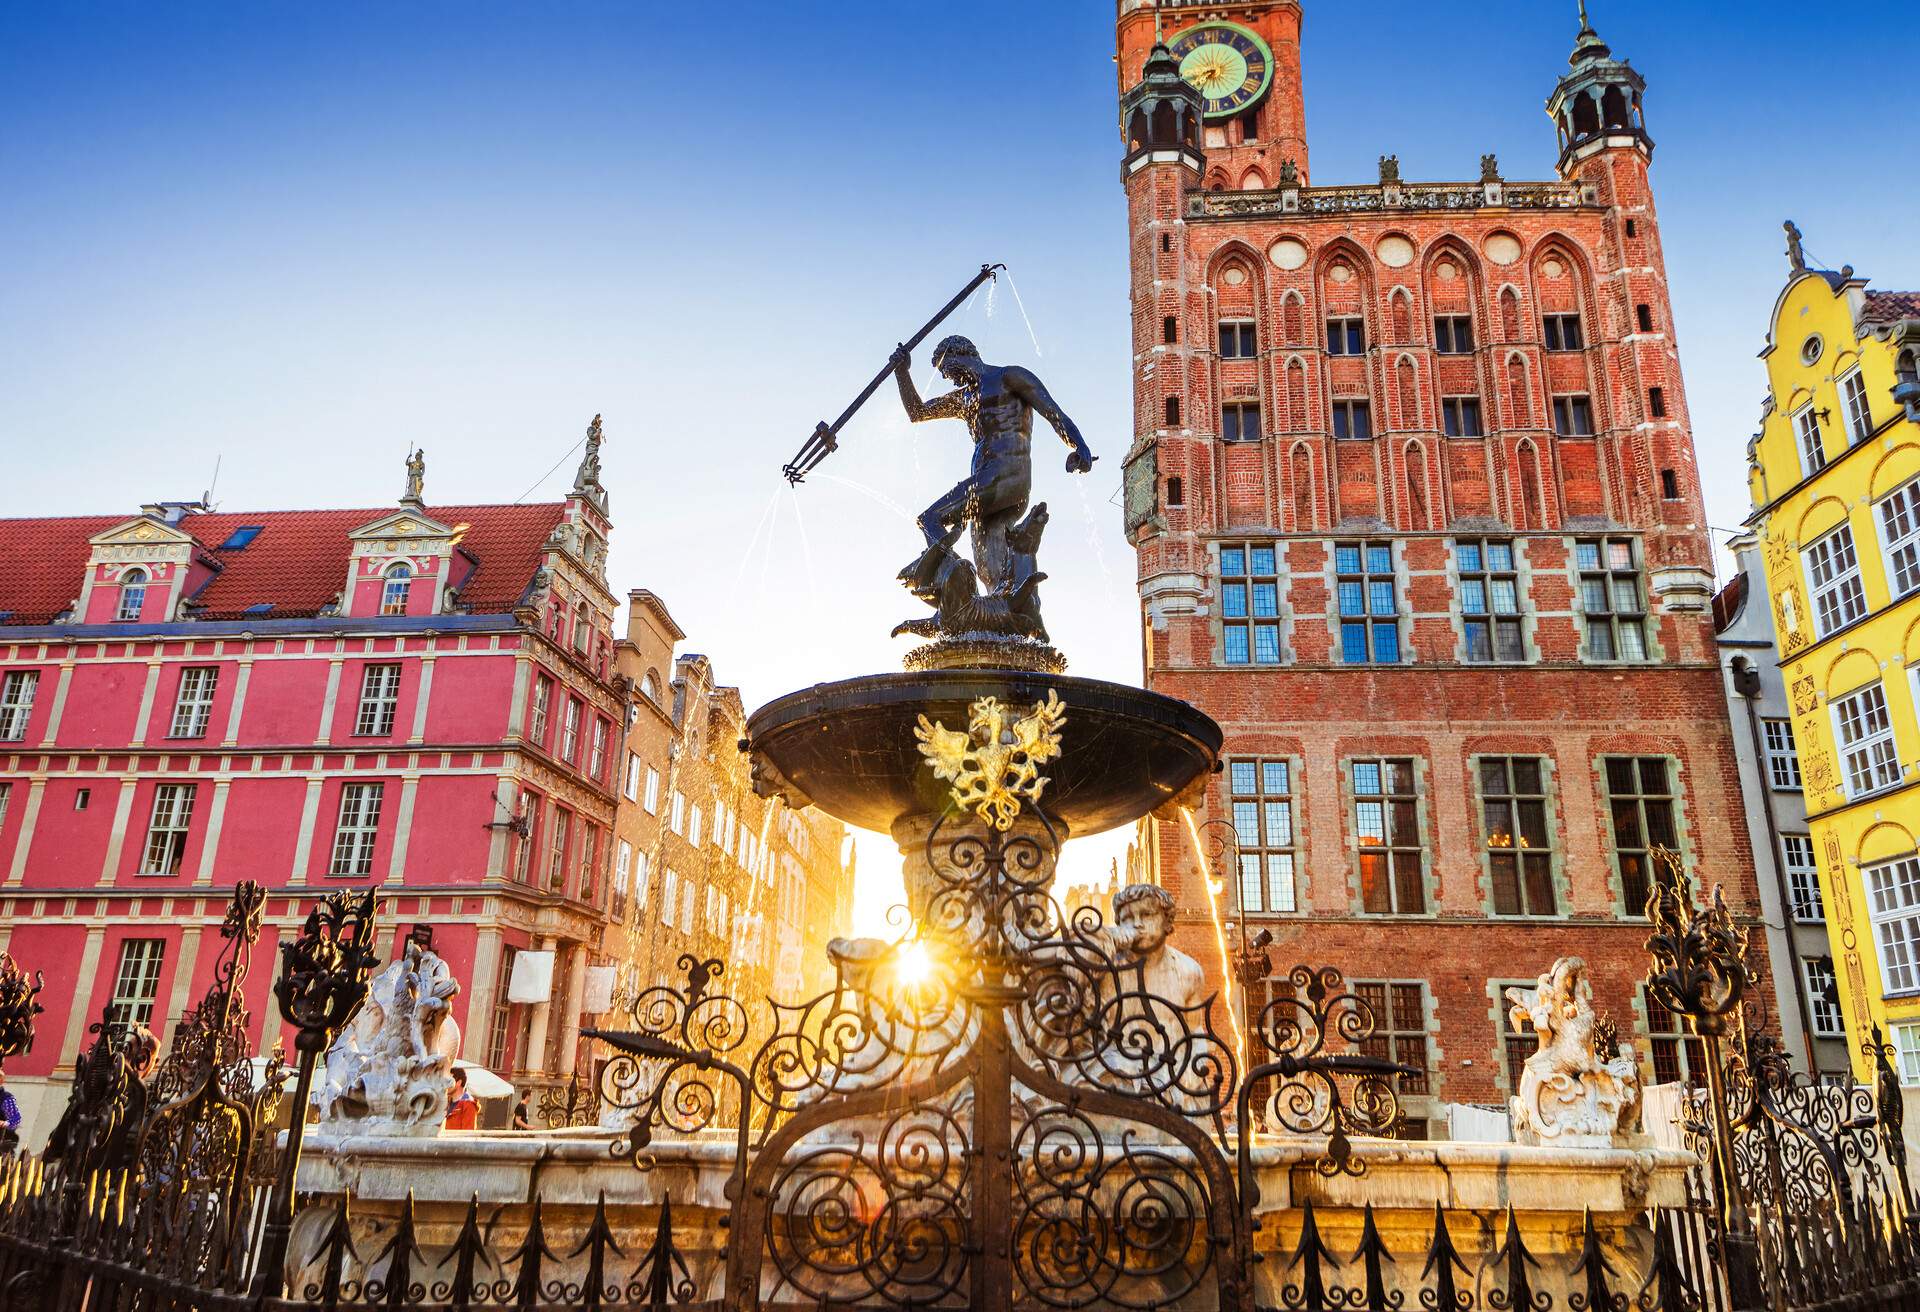 Beautiful fountain in the old center of Gdansk city, Poland